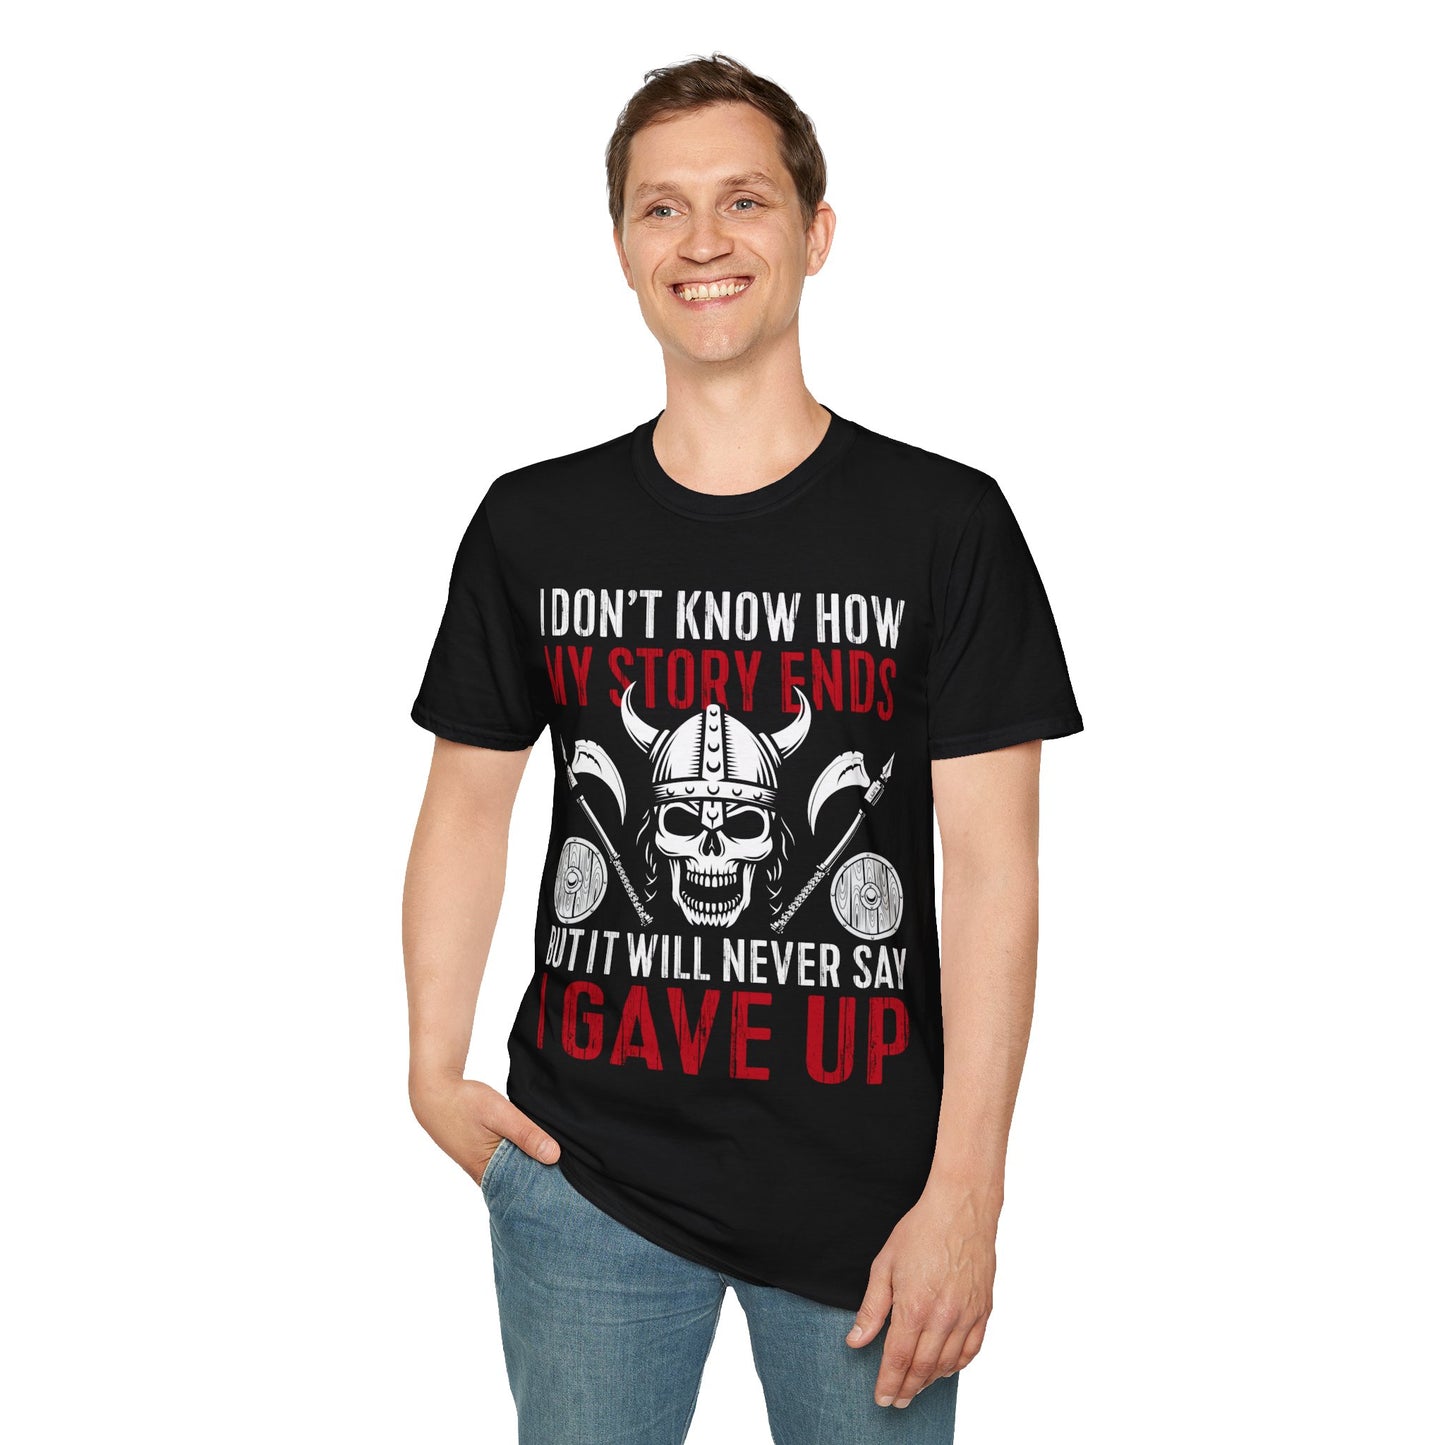 I Do Not Know How My Story Ends But It Will Never Say I Gave Up T-Shirt